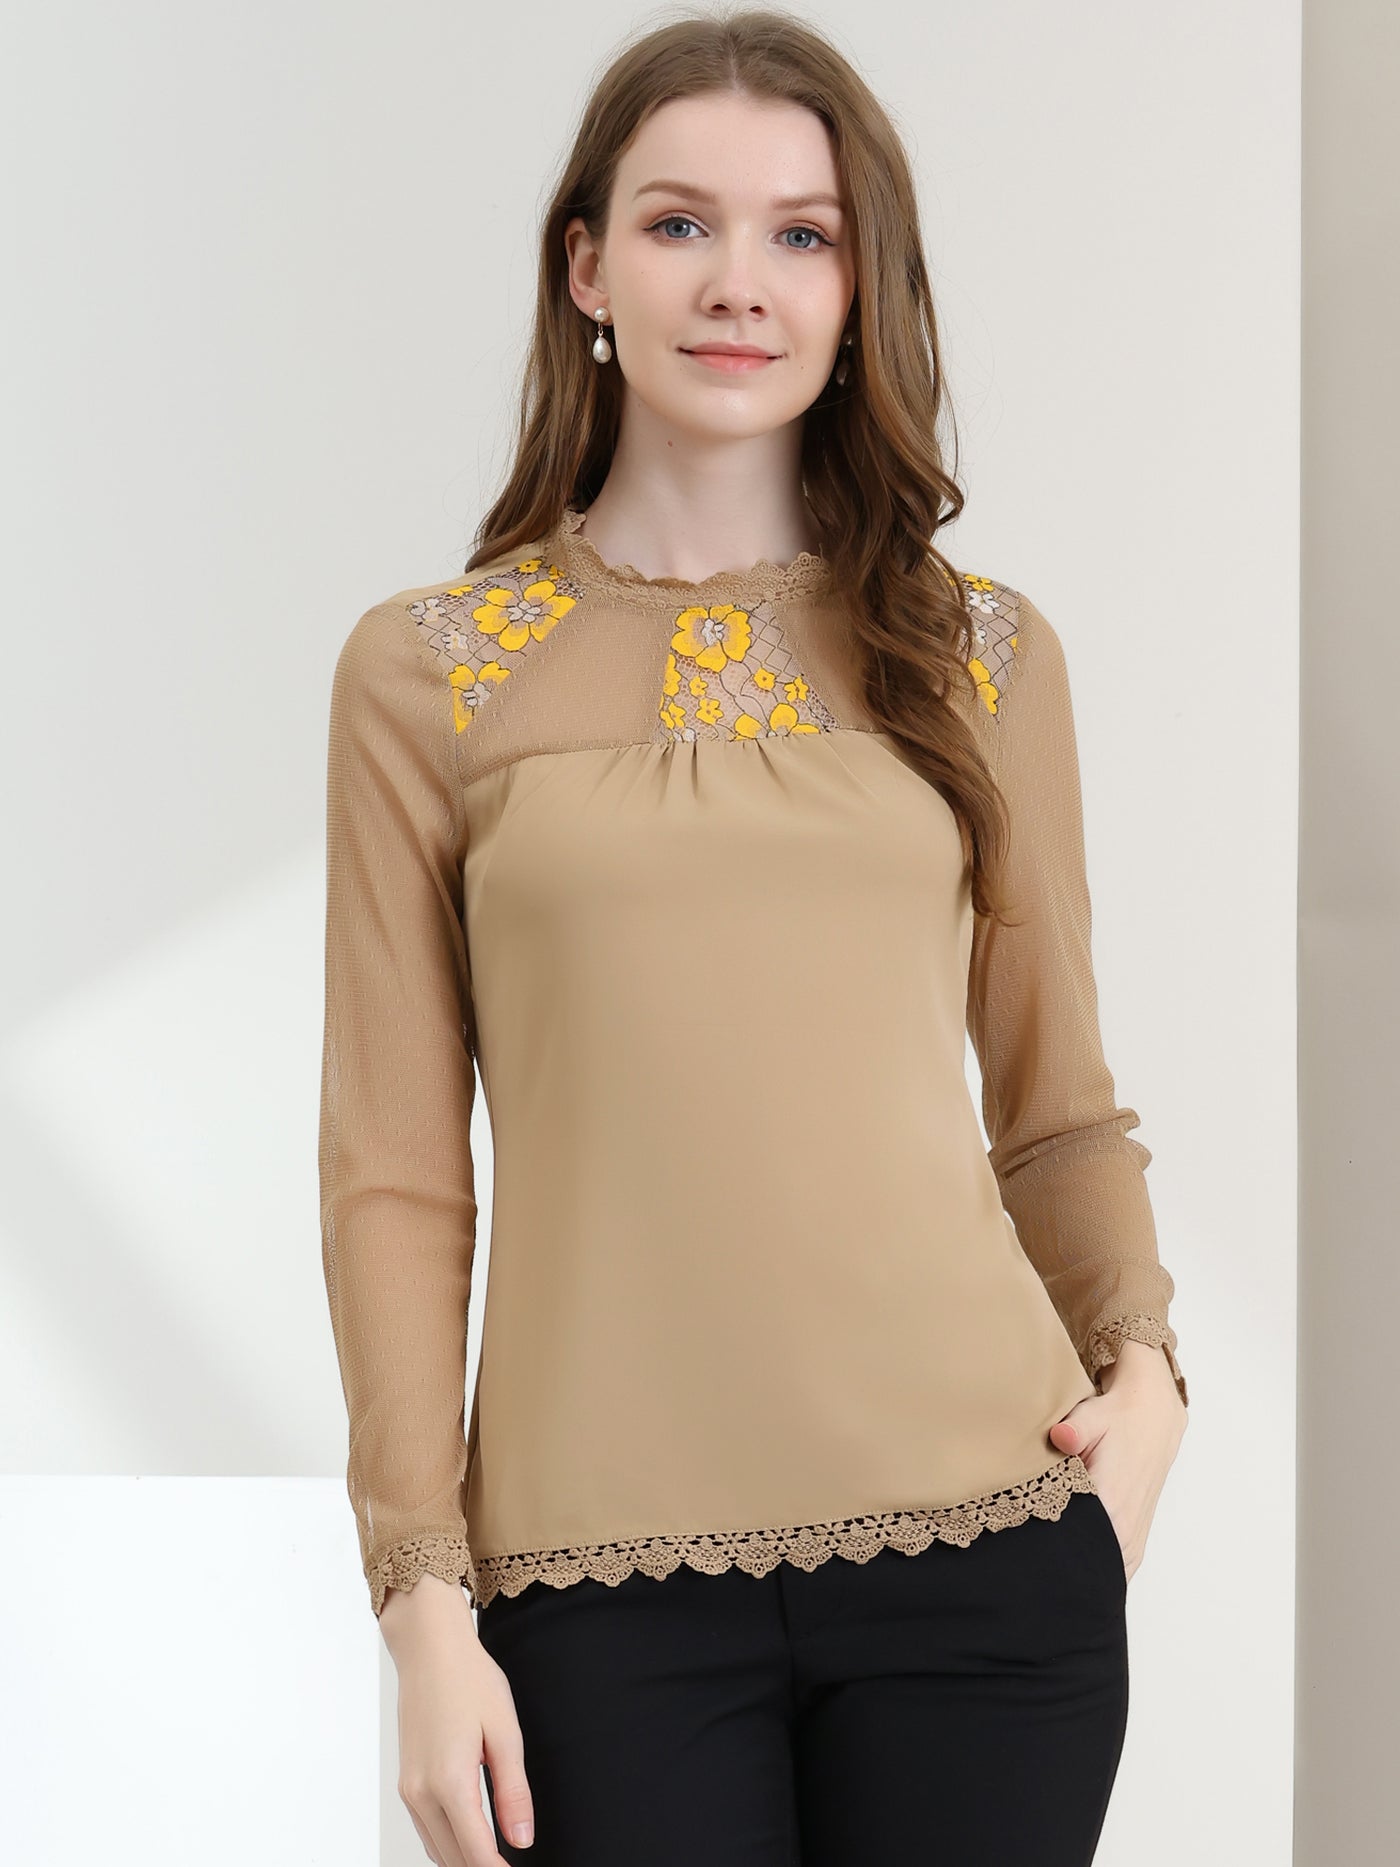 Allegra K Lace Mesh Long Sleeve Top Round Neck Casual Elegant Blouse